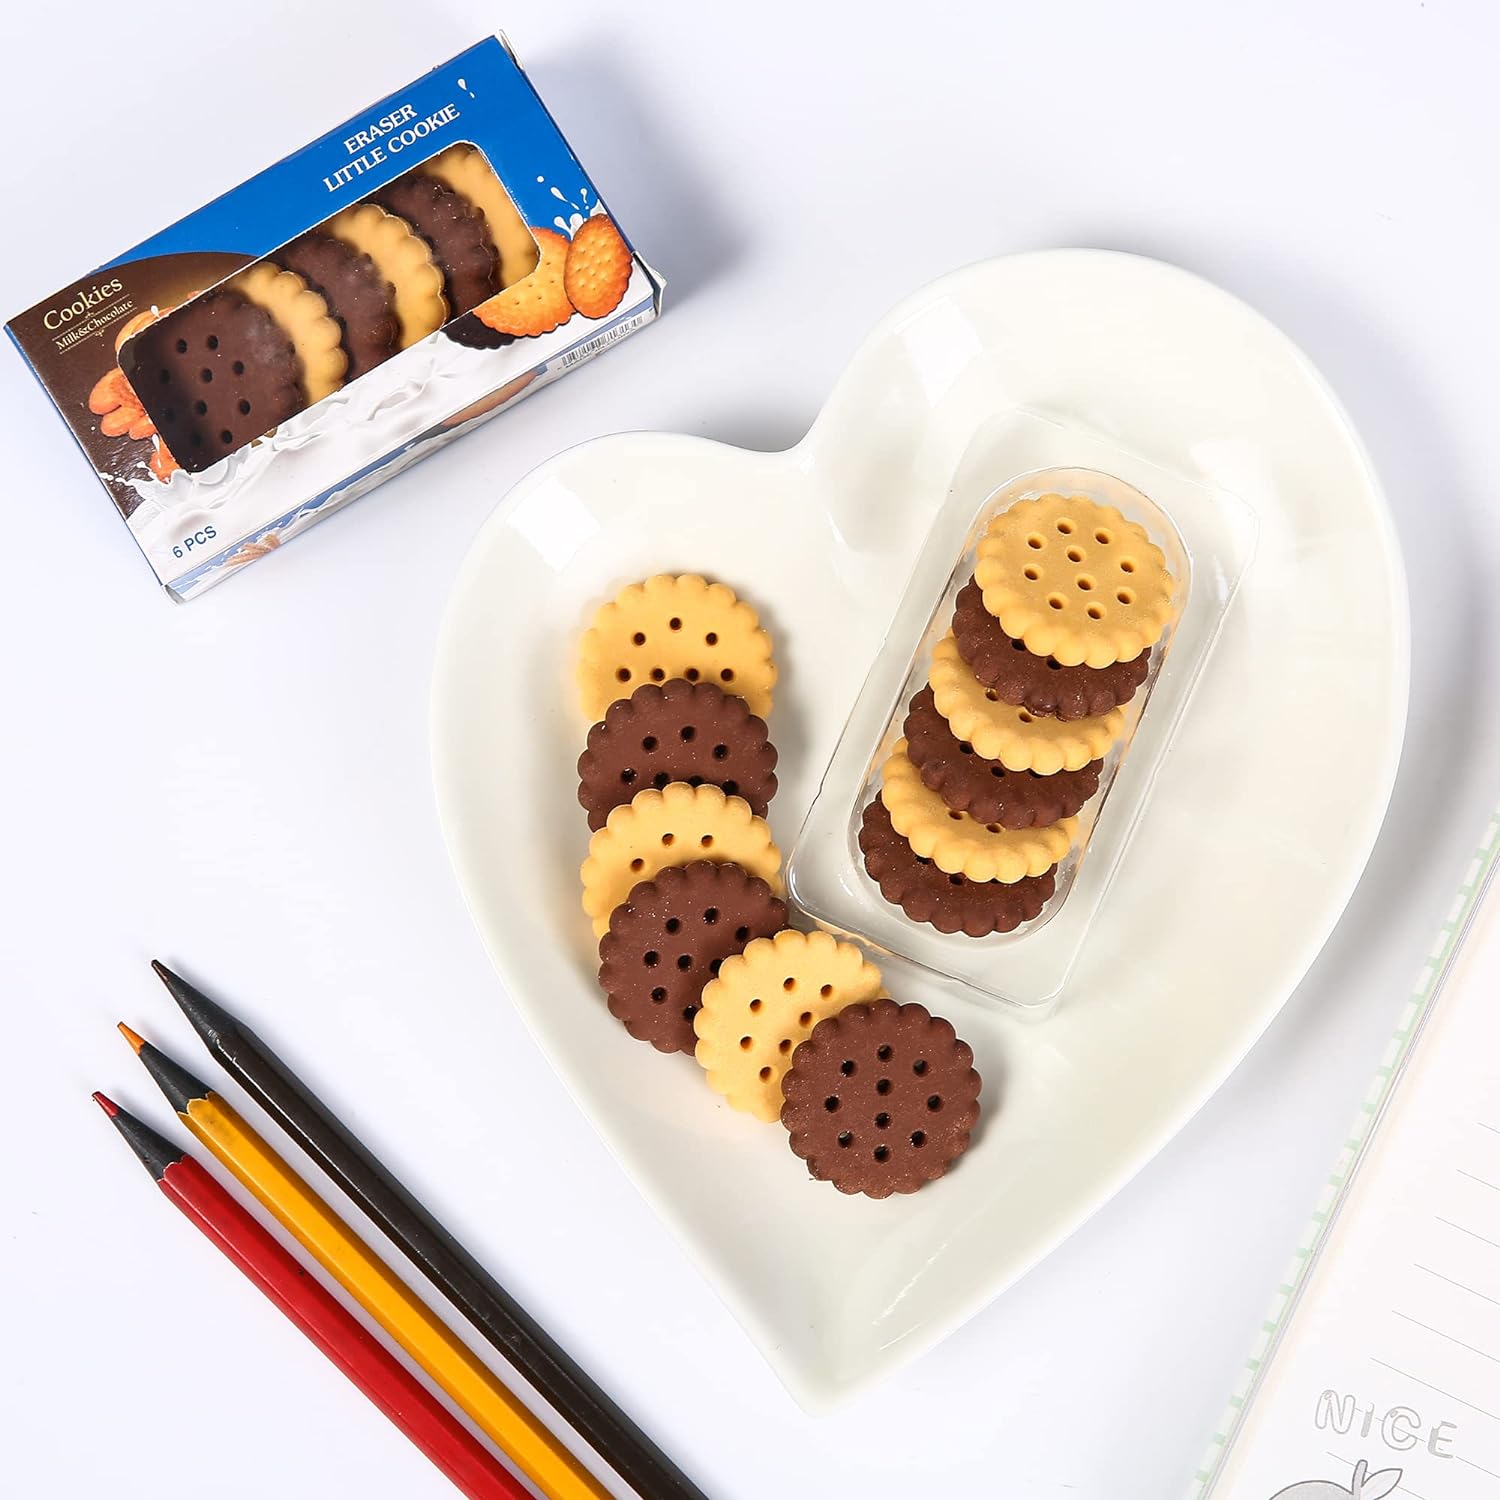 Cute Little Cookie Pencil Erasers for Kids Set of 6